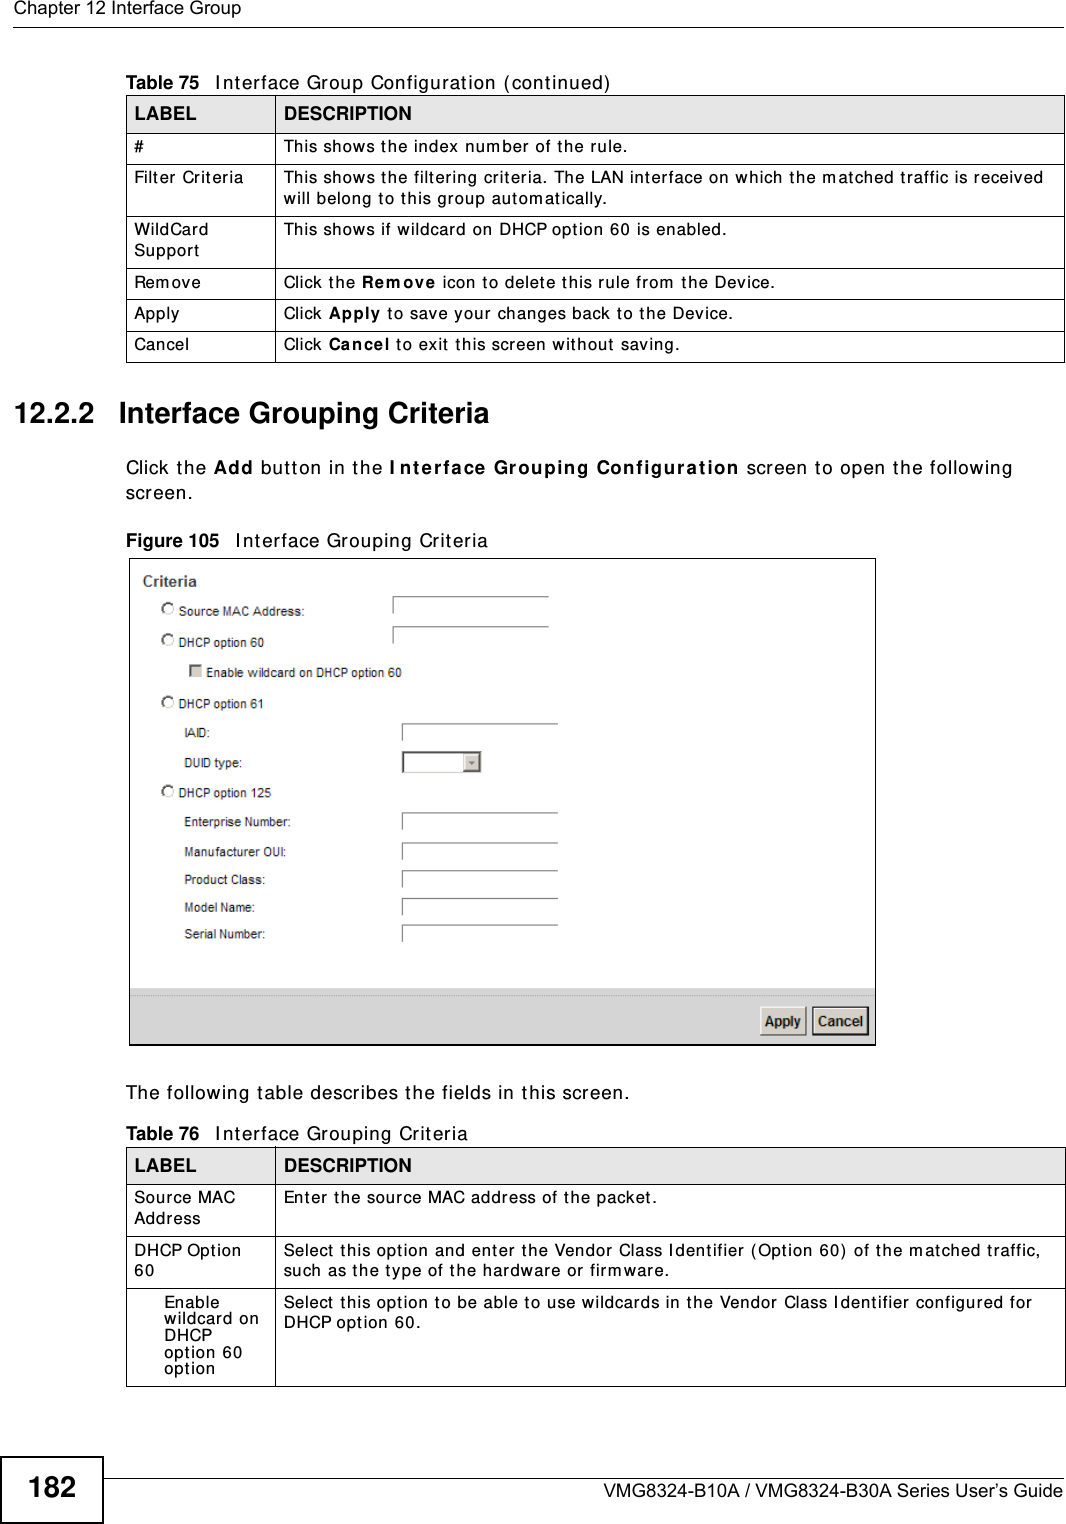 Chapter 12 Interface GroupVMG8324-B10A / VMG8324-B30A Series User’s Guide18212.2.2   Interface Grouping CriteriaClick t he Add butt on in t he I nt e r fa ce  Gr ouping Con figu r a t ion screen t o open the following screen.Figure 105   I nt erface Grouping Crit eria The following t able describes t he fields in t his screen. #This shows t he index  num ber of t he rule.Filt er Criteria This shows t he filter ing crit eria. The LAN int erface on which the m at ched t raffic is received will belong t o t his group aut om at ically.WildCard SupportThis shows if wildcard on DHCP opt ion 60 is enabled.Rem ov e Click t he Rem ove  icon to delet e t his rule fr om  t he Device.Apply Click Apply t o save your changes back to t he Device.Cancel Click Ca nce l to exit  t his screen w it hout saving.Table 75   I nt erface Group Configurat ion ( cont inued)LABEL DESCRIPTIONTable 76   I nt erface Grouping Crit eriaLABEL DESCRIPTIONSource MAC AddressEnter the source MAC address of the packet.DHCP Opt ion 60Select this opt ion and ent er the Vendor Class I dentifier ( Option 60)  of t he m atched t raffic, such as the t ype of t he har dware or firm war e.Enable wildcard on DHCP opt ion 60 opt ionSelect  this opt ion to be able to use w ildcards in t he Vendor Class I dent ifier  configur ed for DHCP option 60.